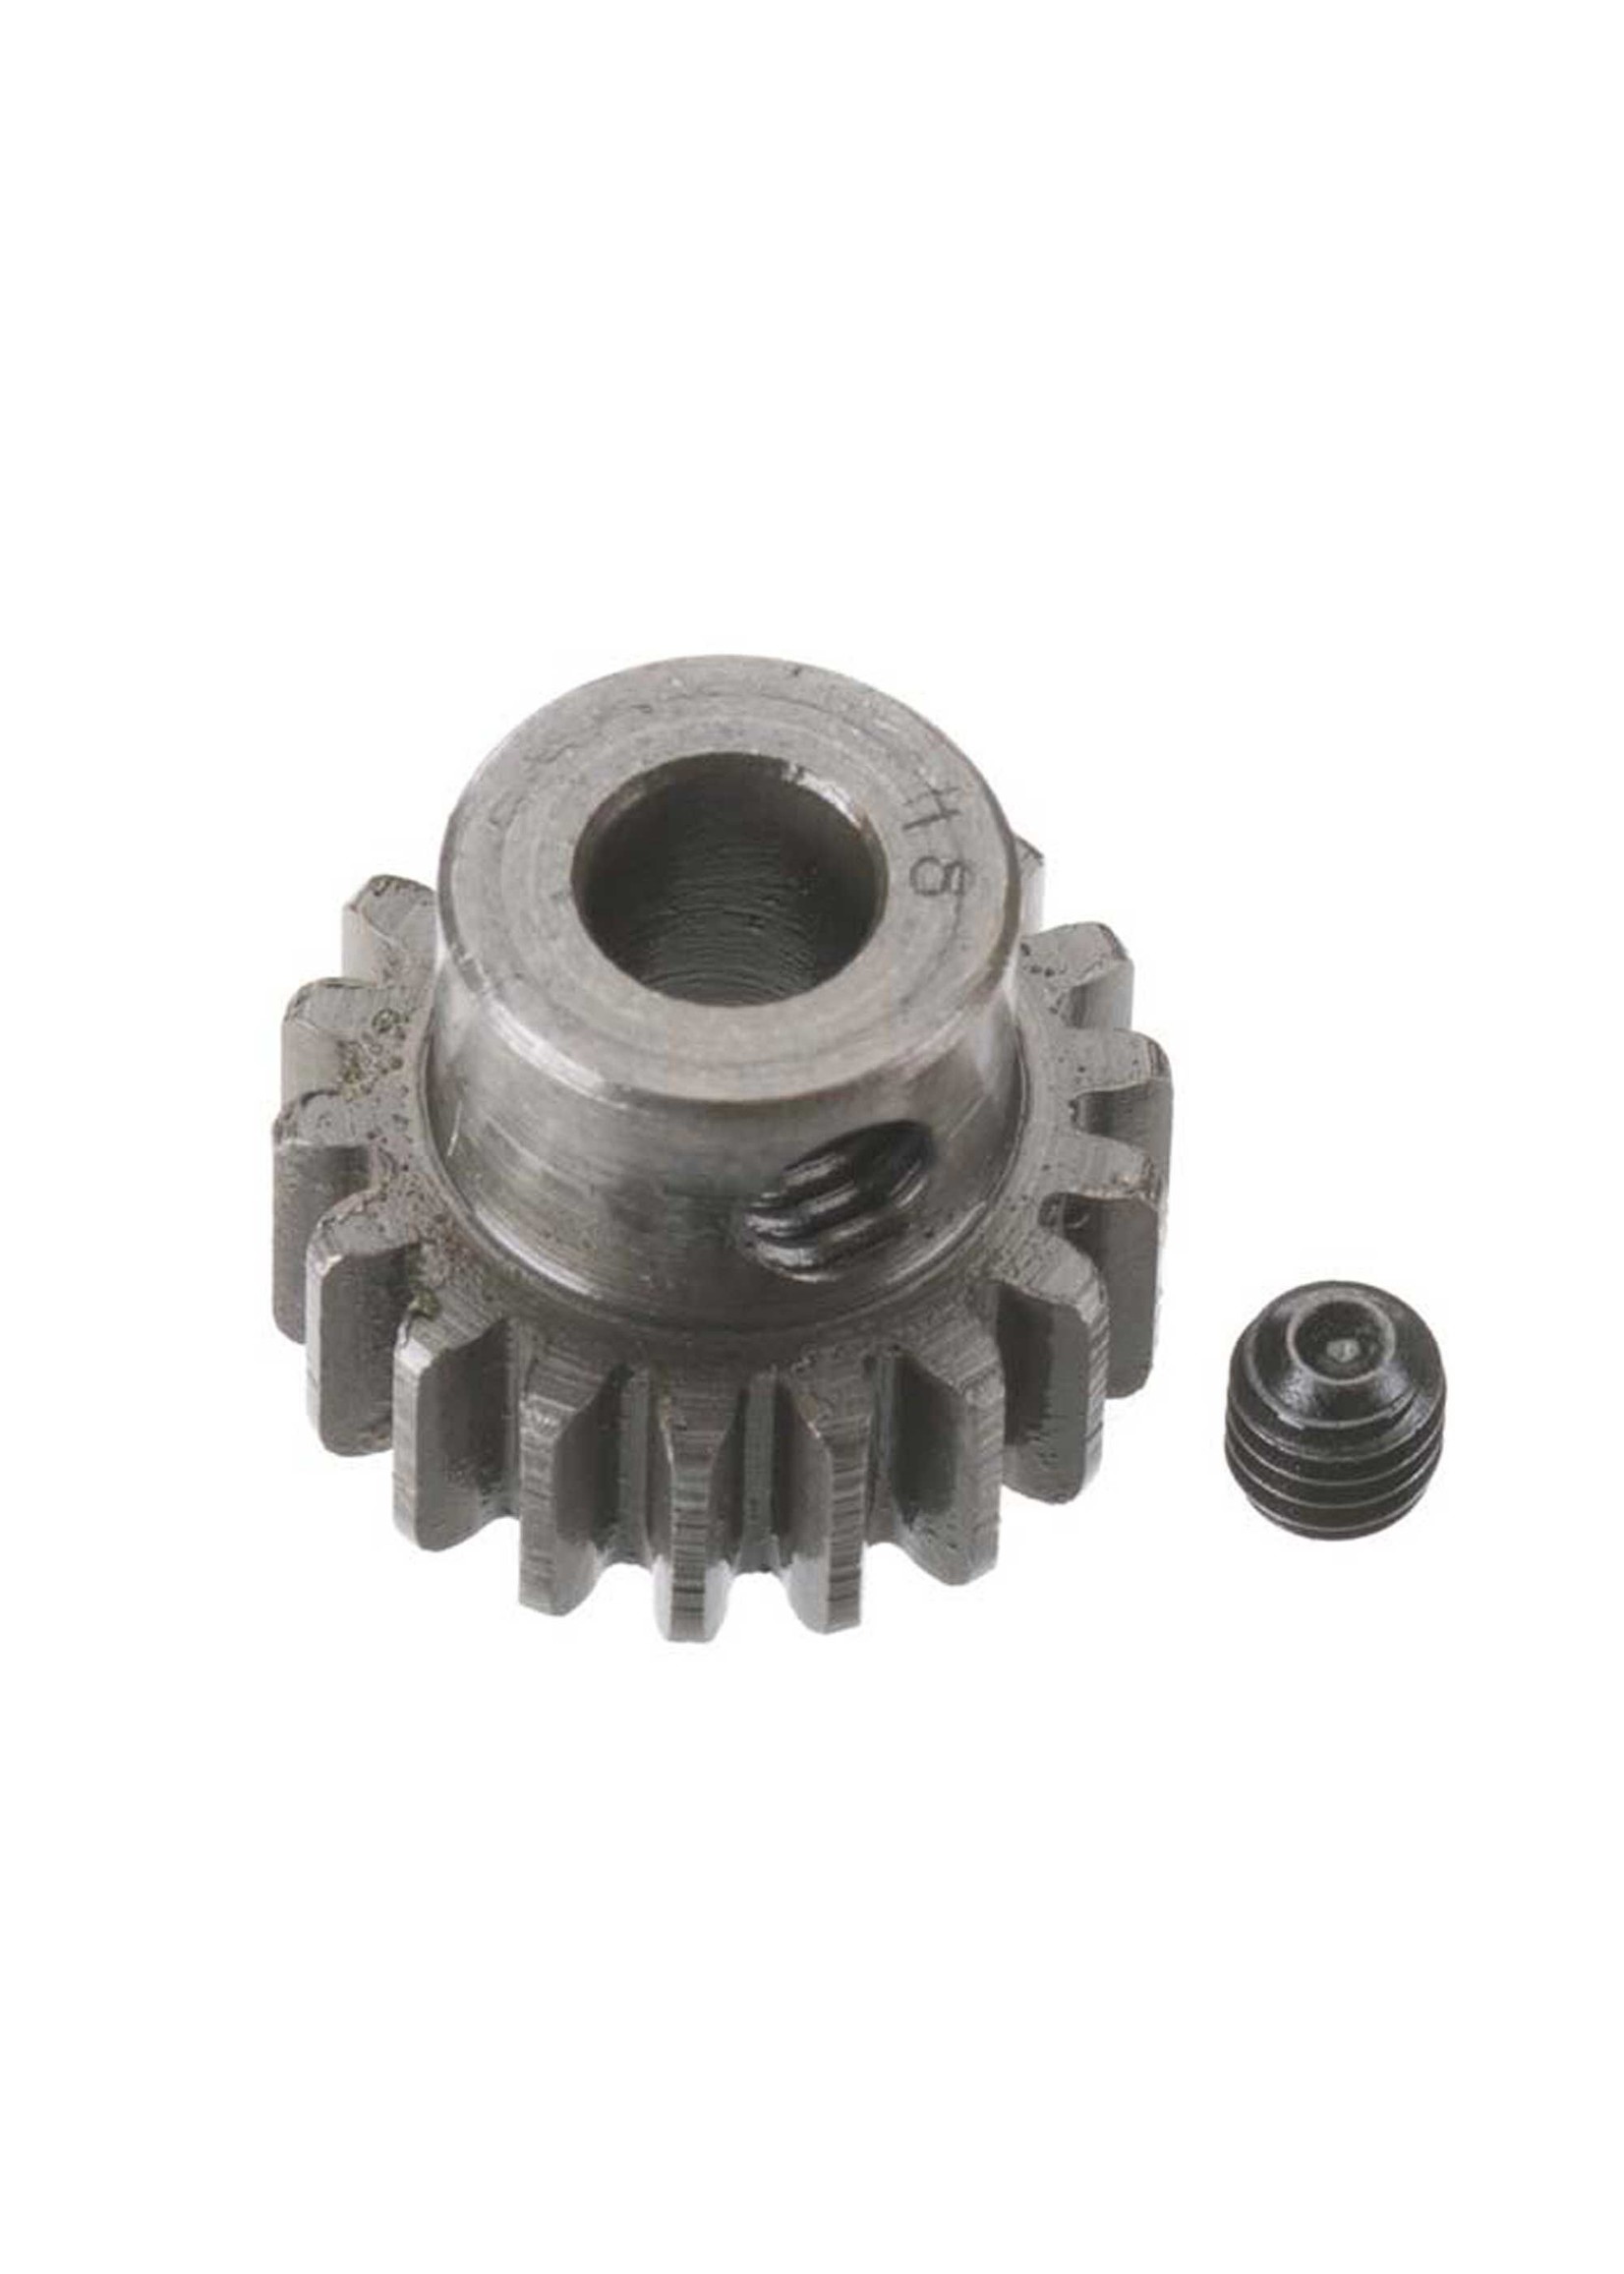 Robinson Racing Products RRP8718 Robinson Racing Products Extra Hard Steel .8 Mod Pinion Gear w/5mm Bore (18T)